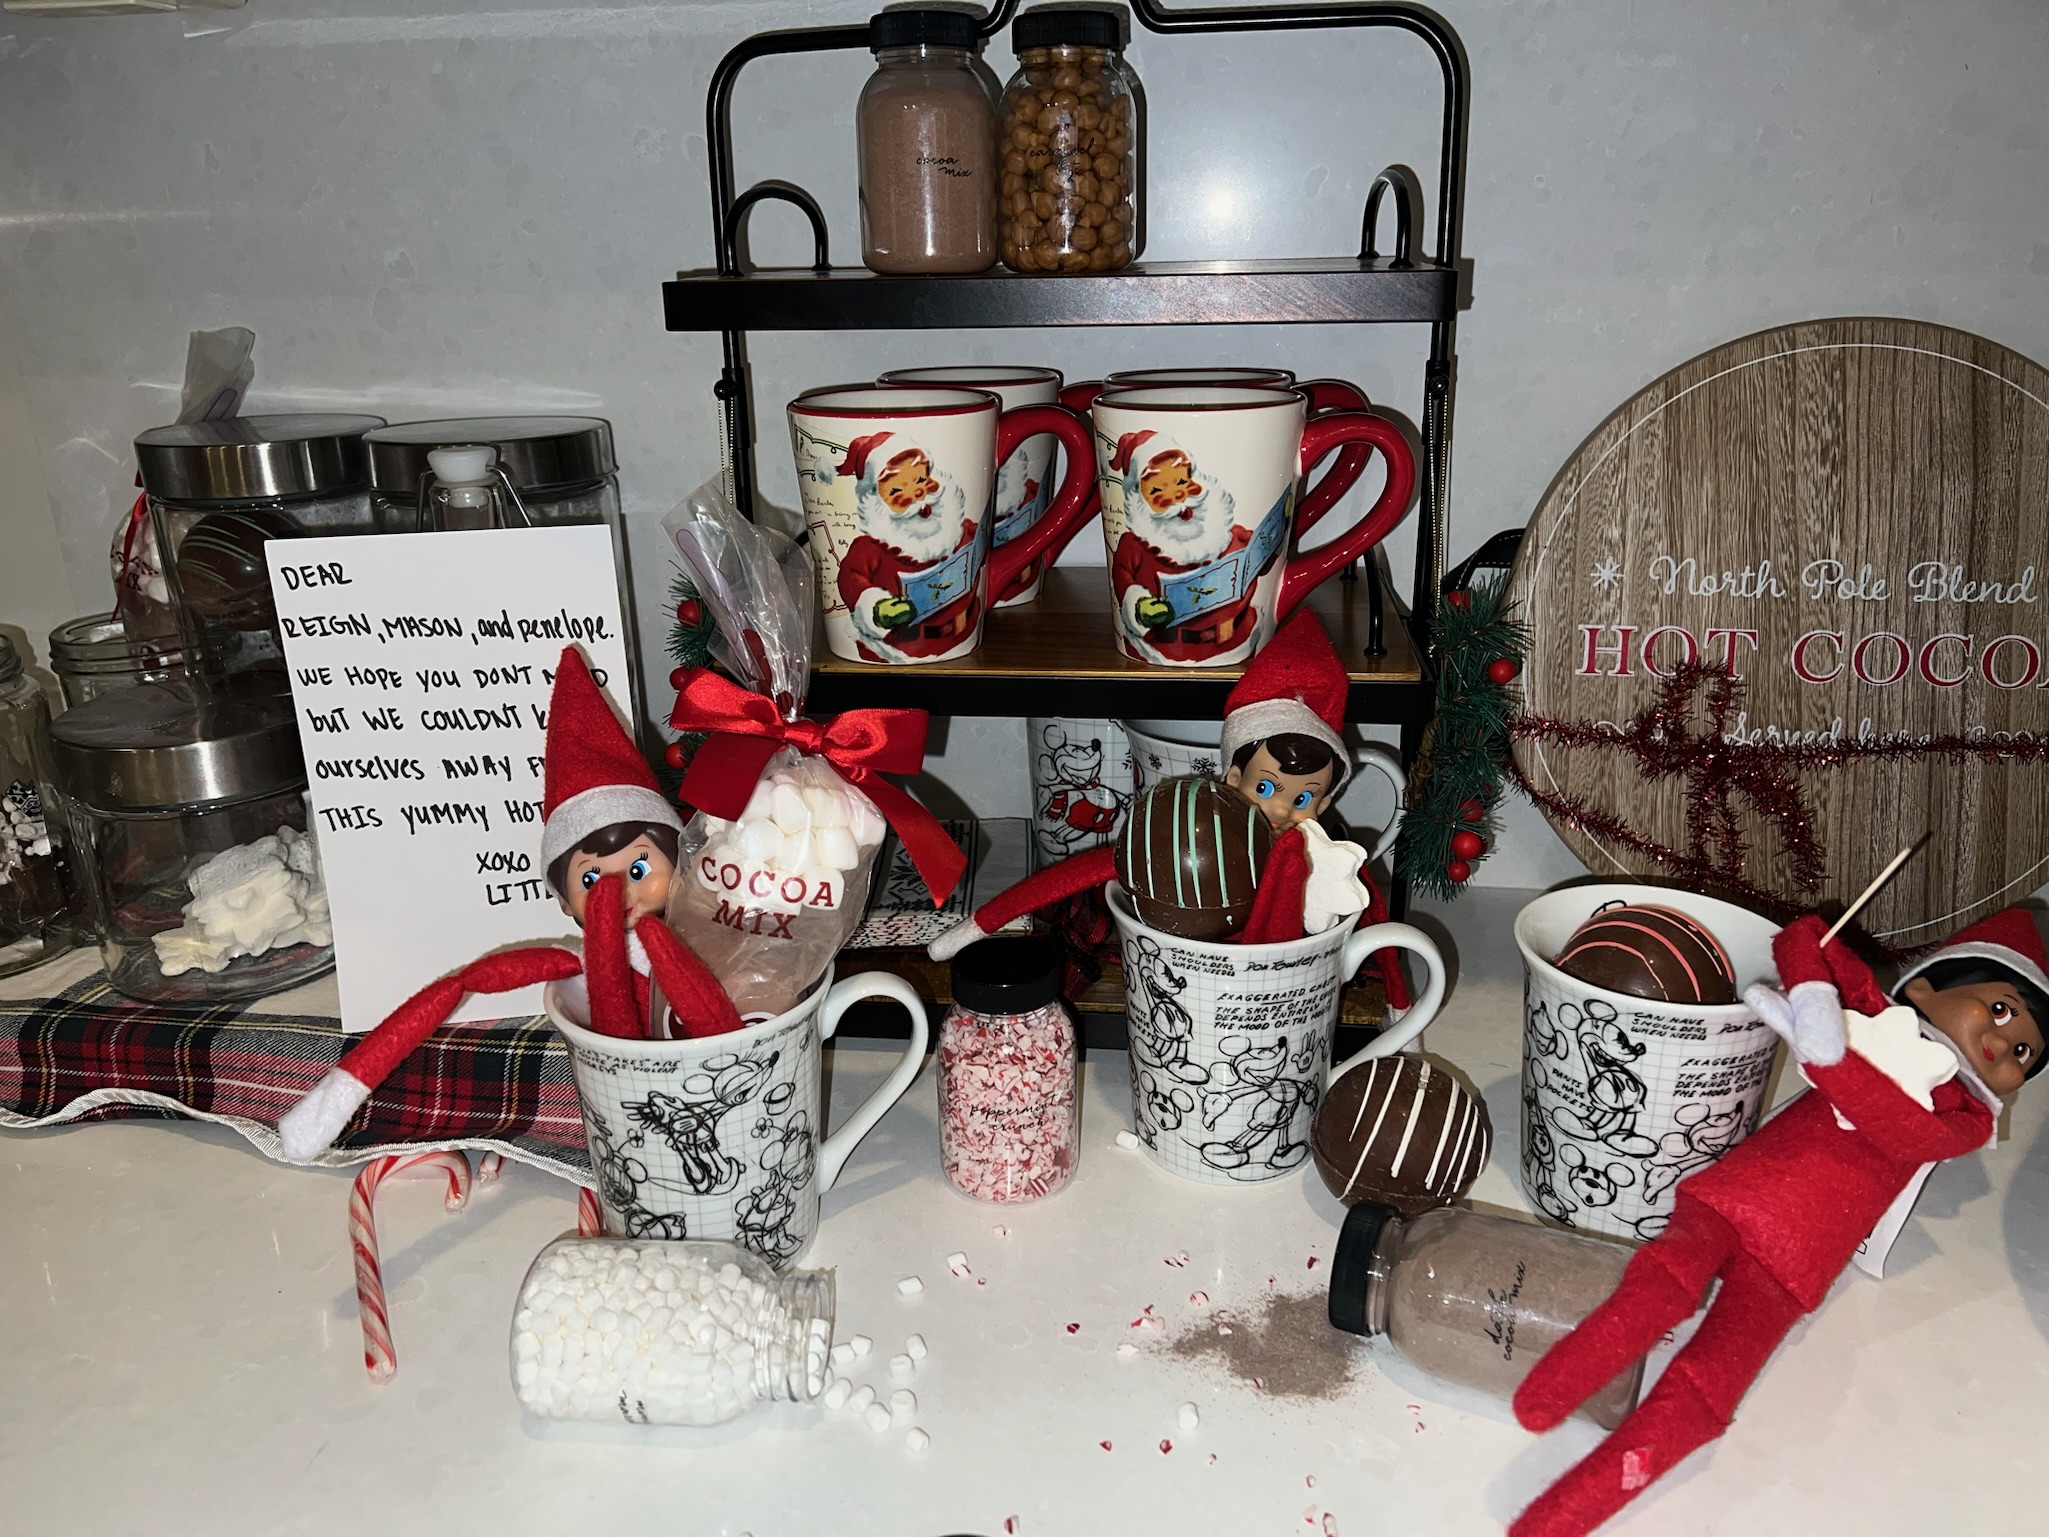 KKB Holiday Decor Elf on the shelf in Cocoa mess